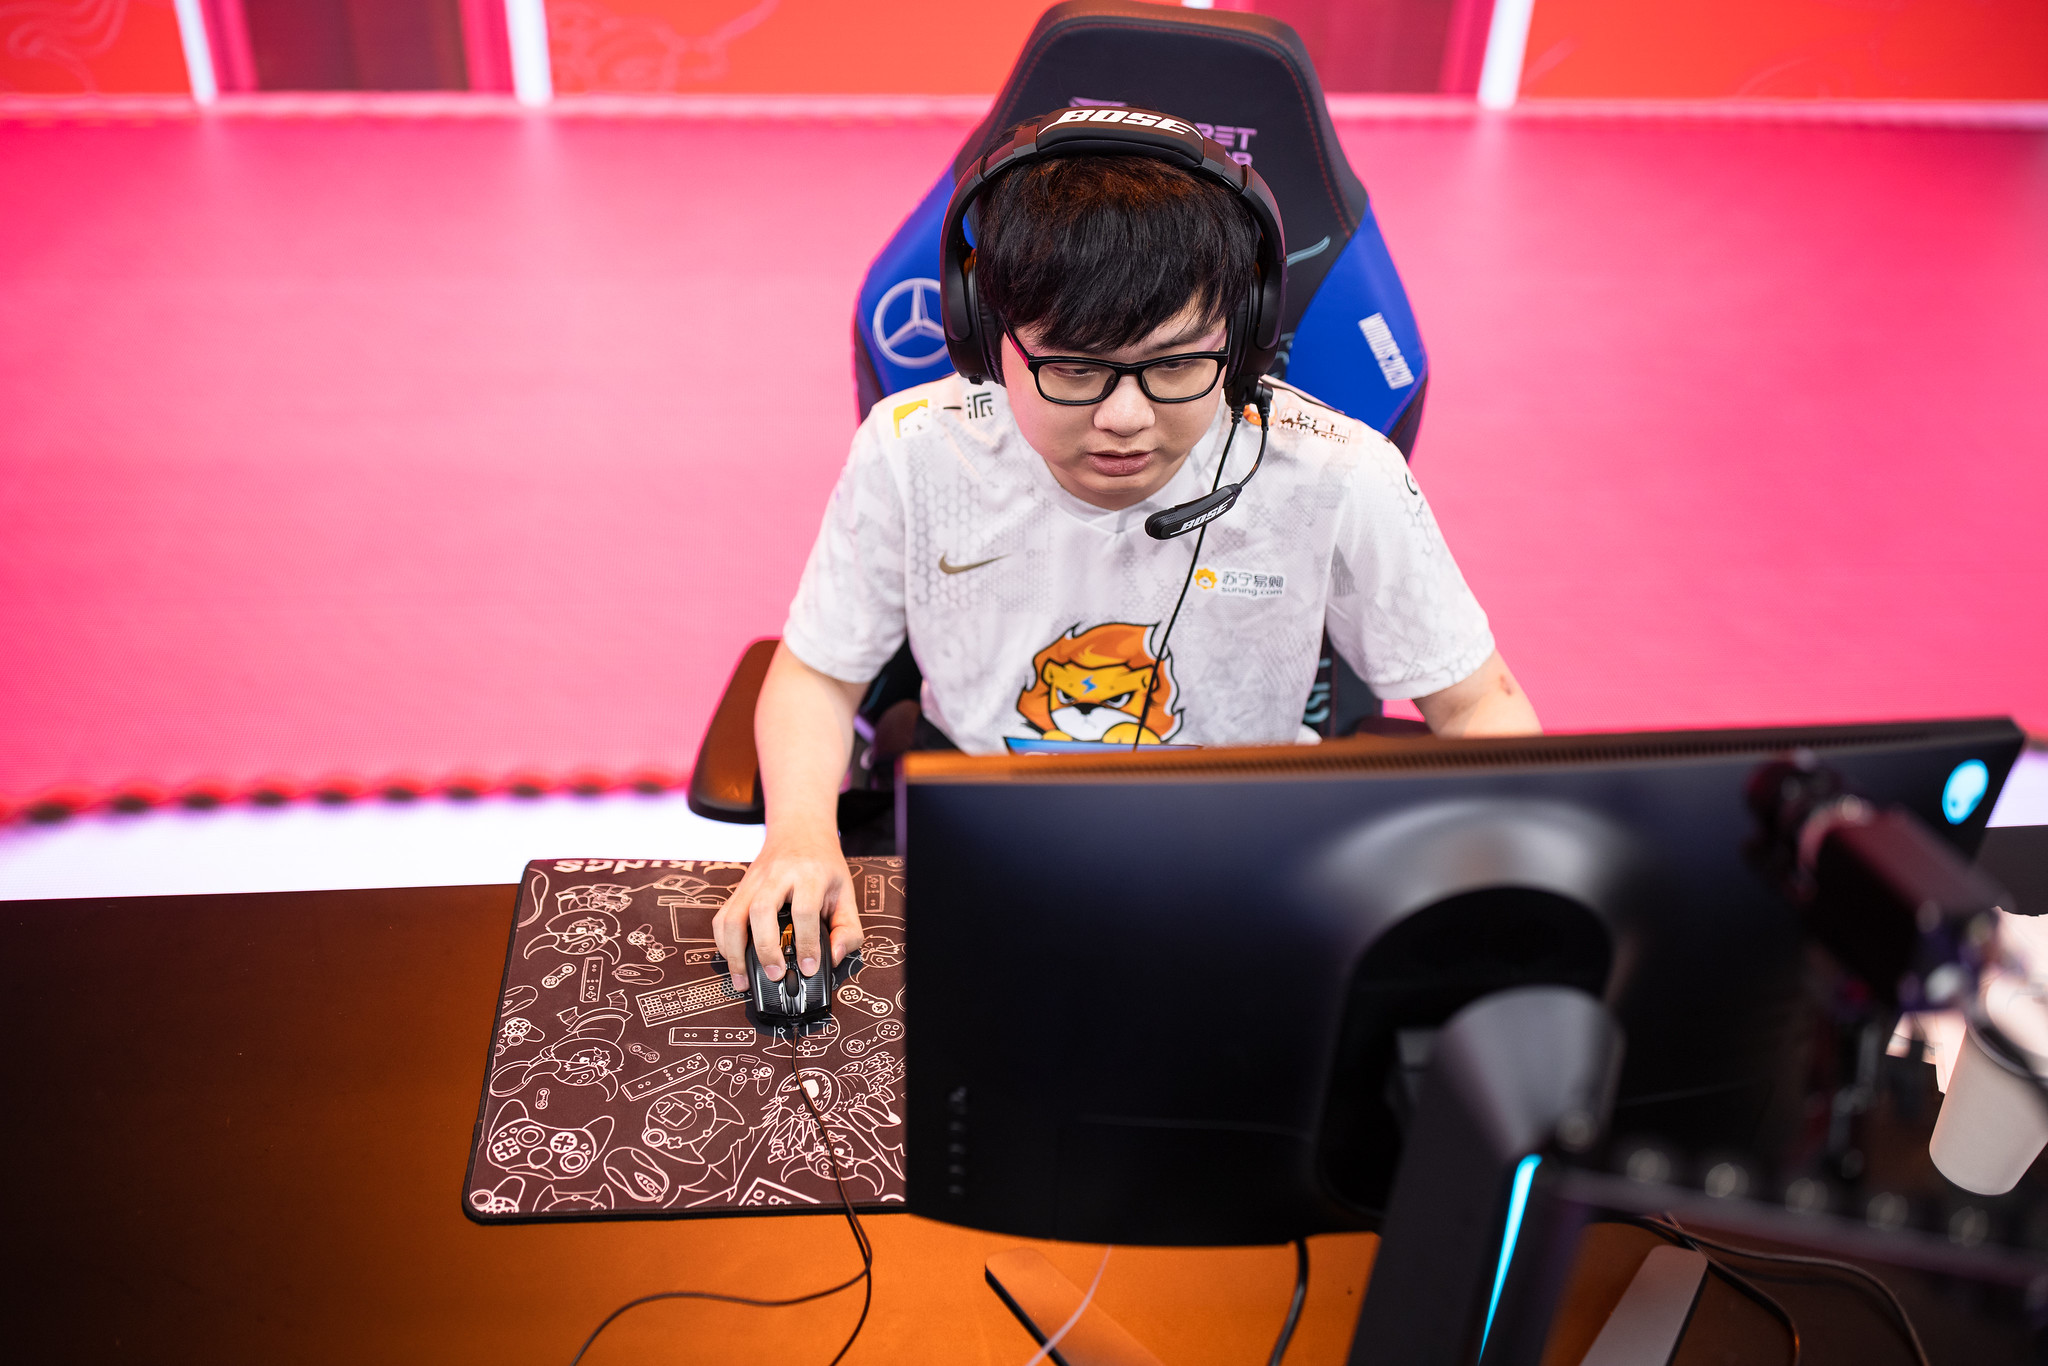 Suning take down Team Liquid at Worlds 2020 with a surprise Draven pick |  Dot Esports